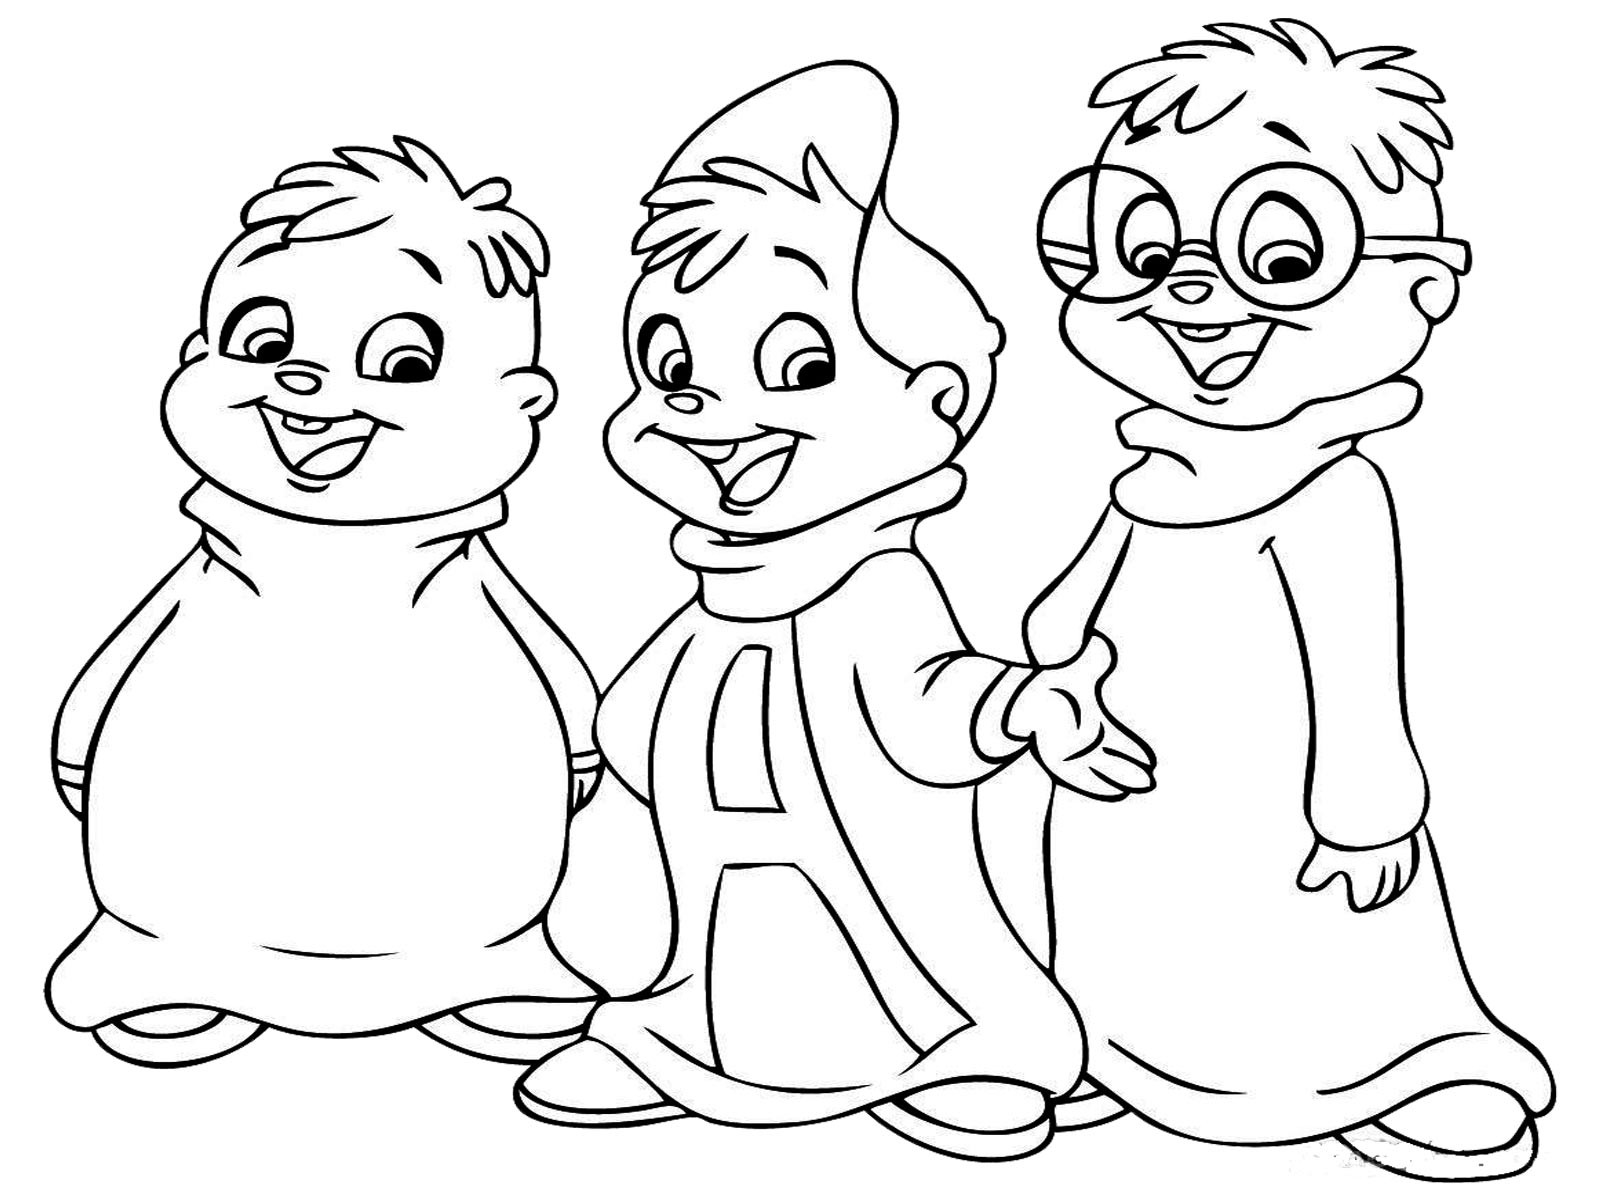 Cool Coloring Pages For Boys
 Coloring Pages for Boys 2018 Dr Odd